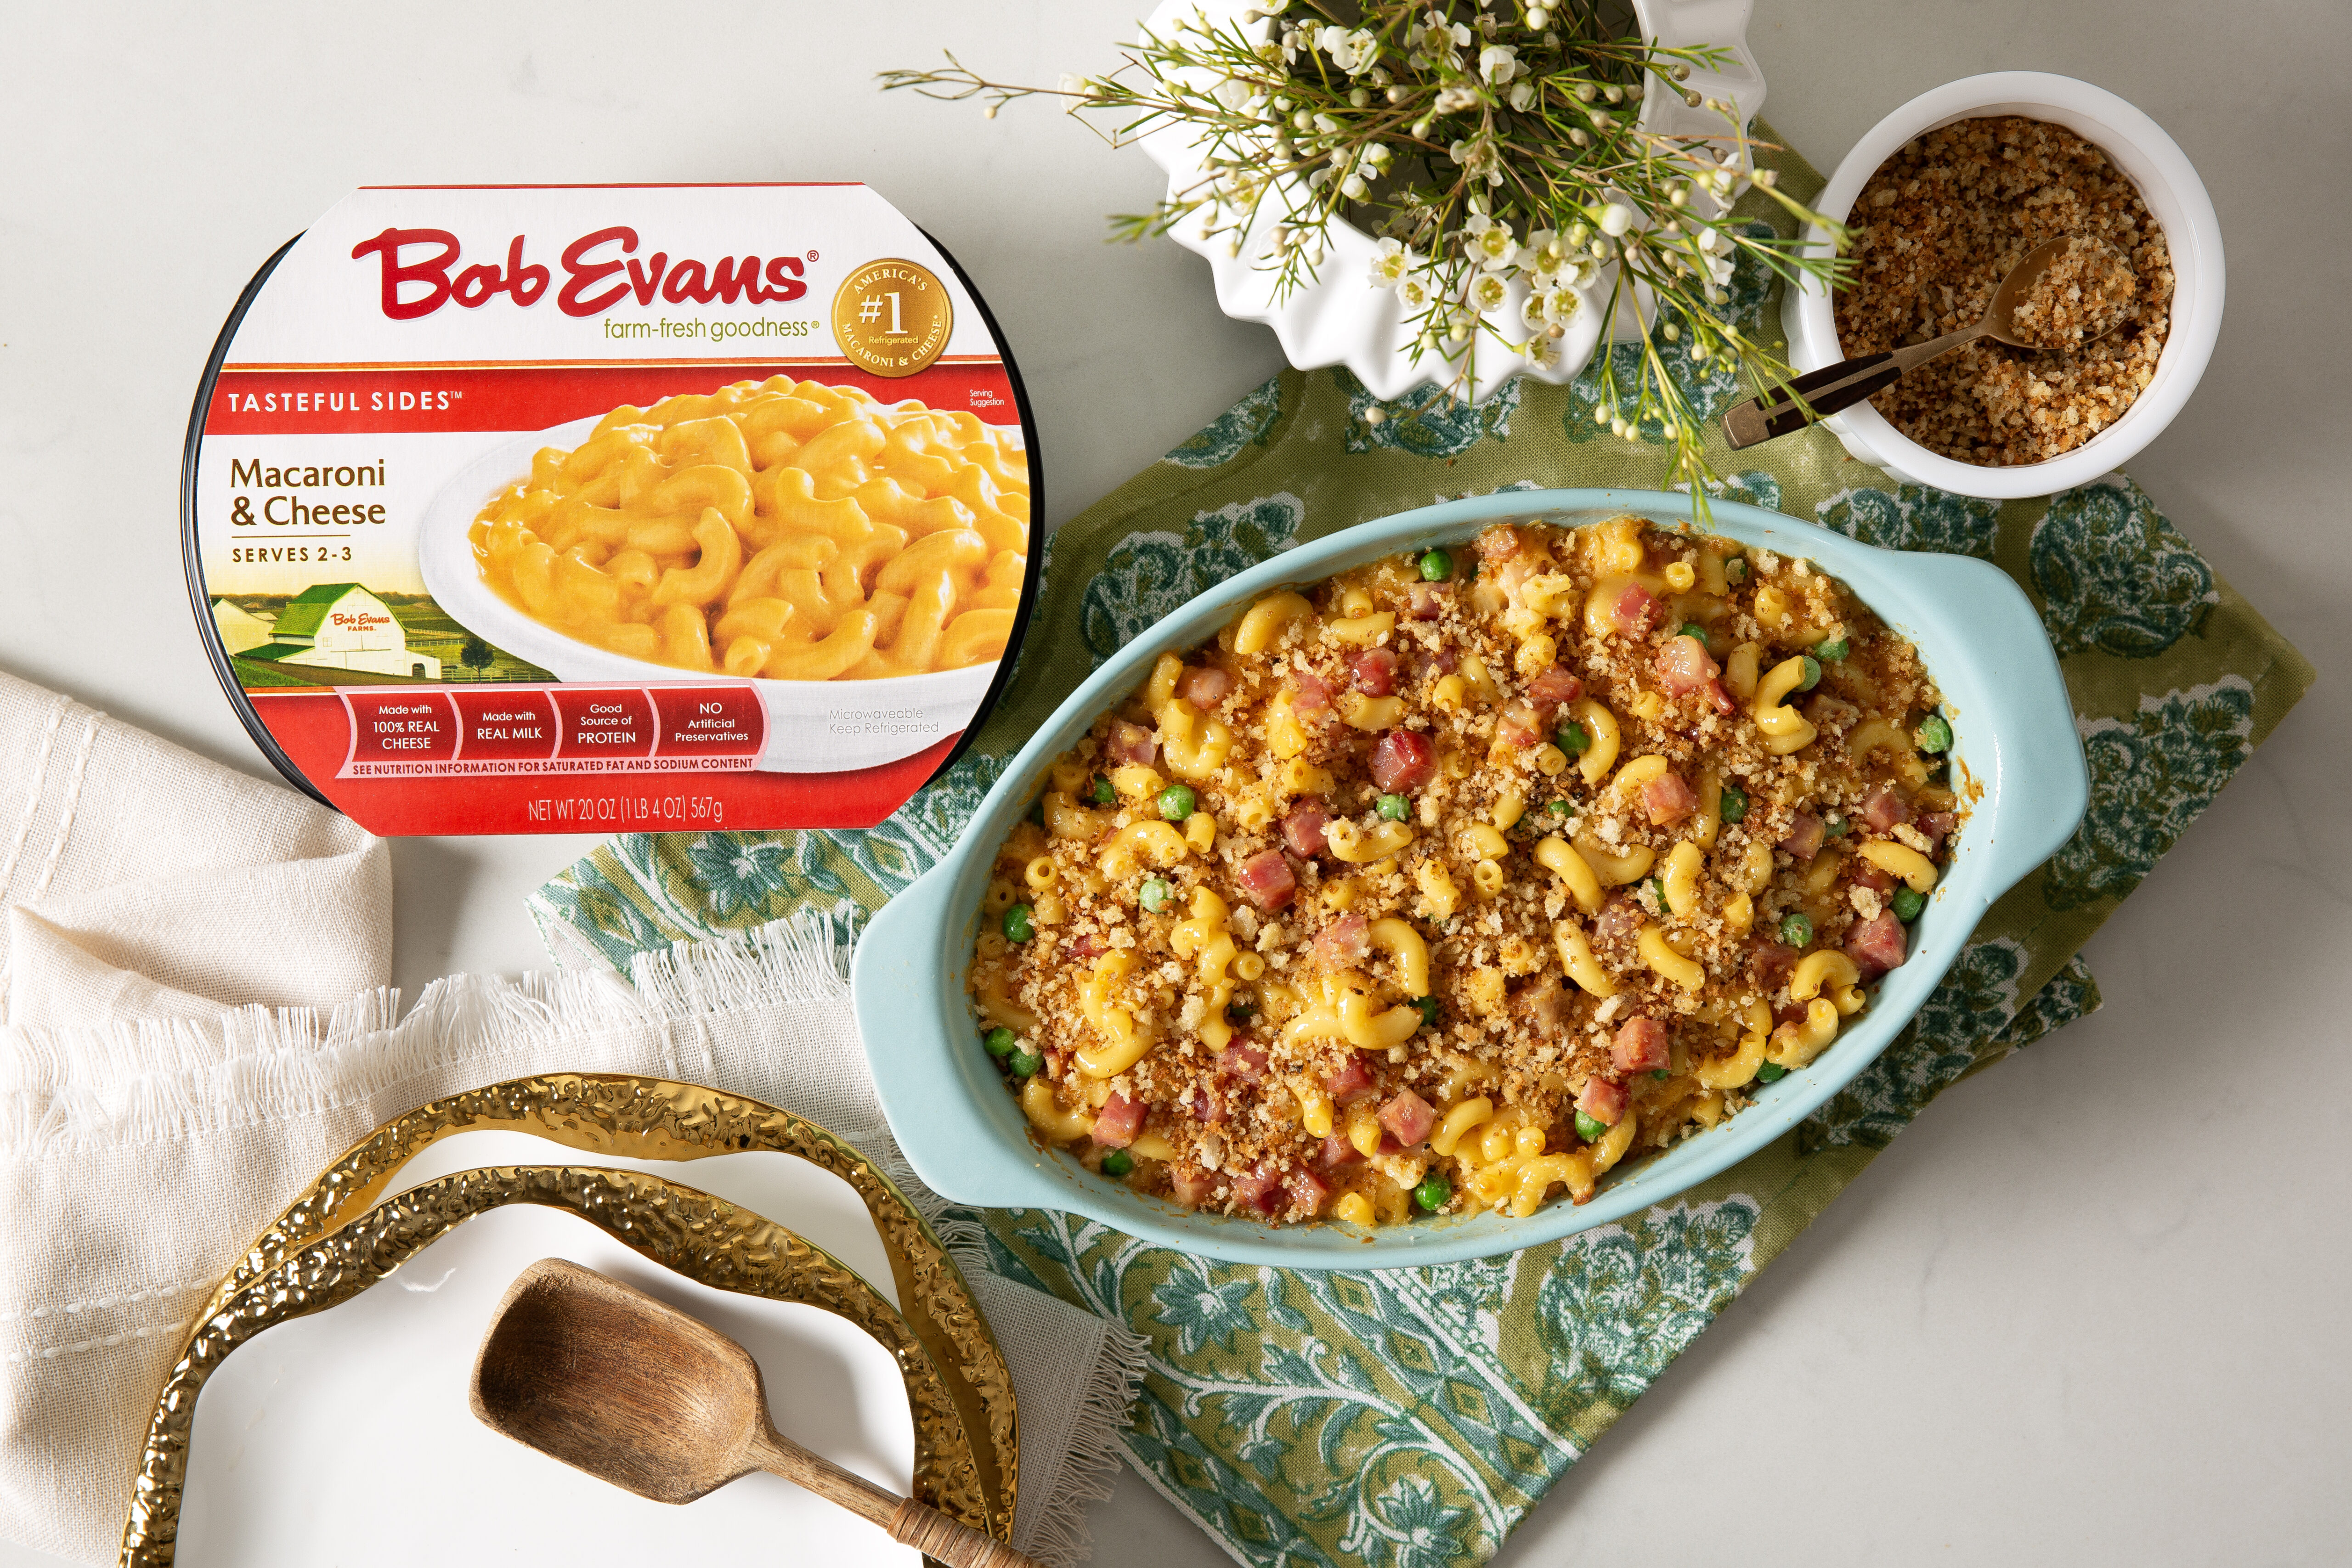 baked macaroni & cheese with peas and ham next to a package of Bob Evans Macaroni & Cheese